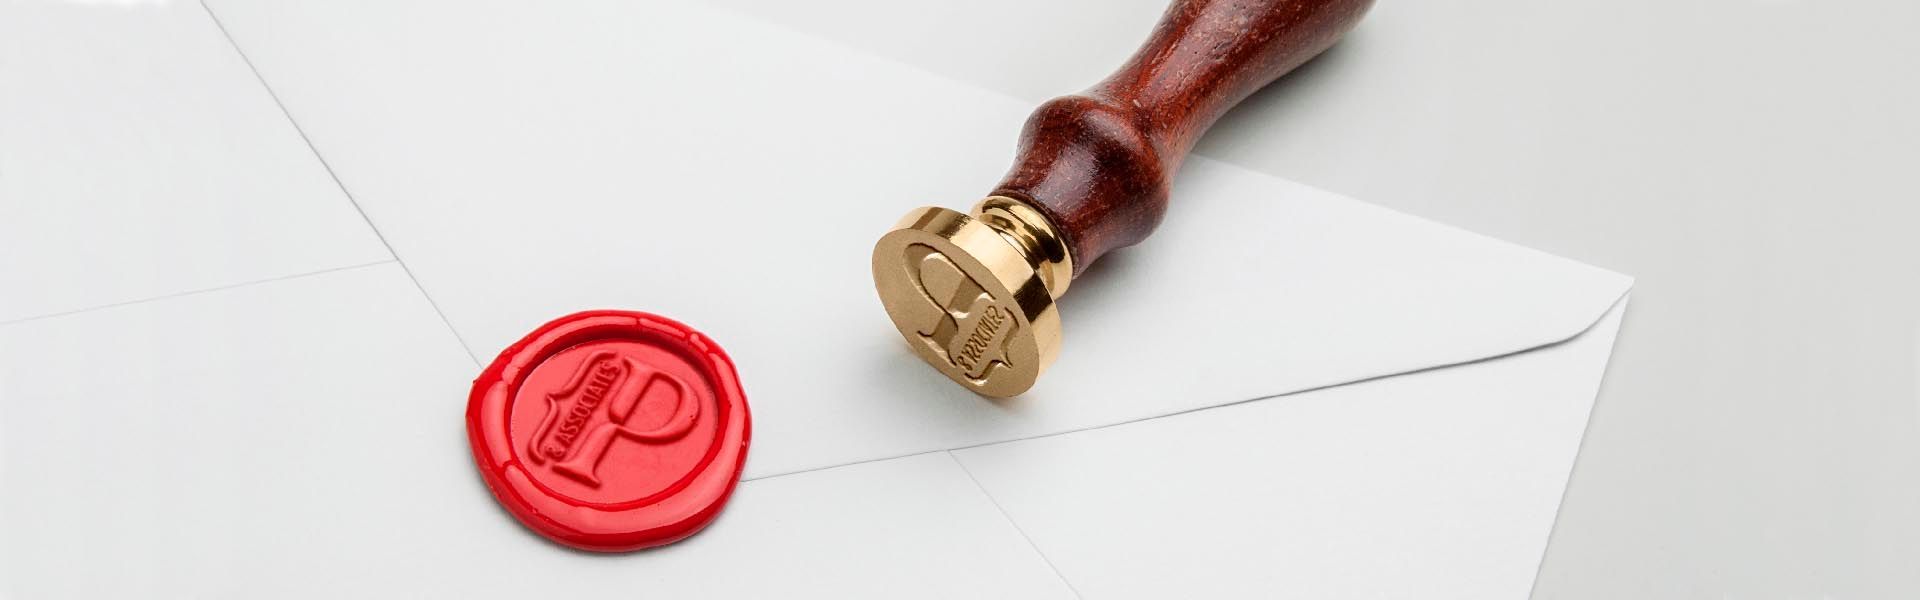 a red wax seal with the pillinger and associates logo on it